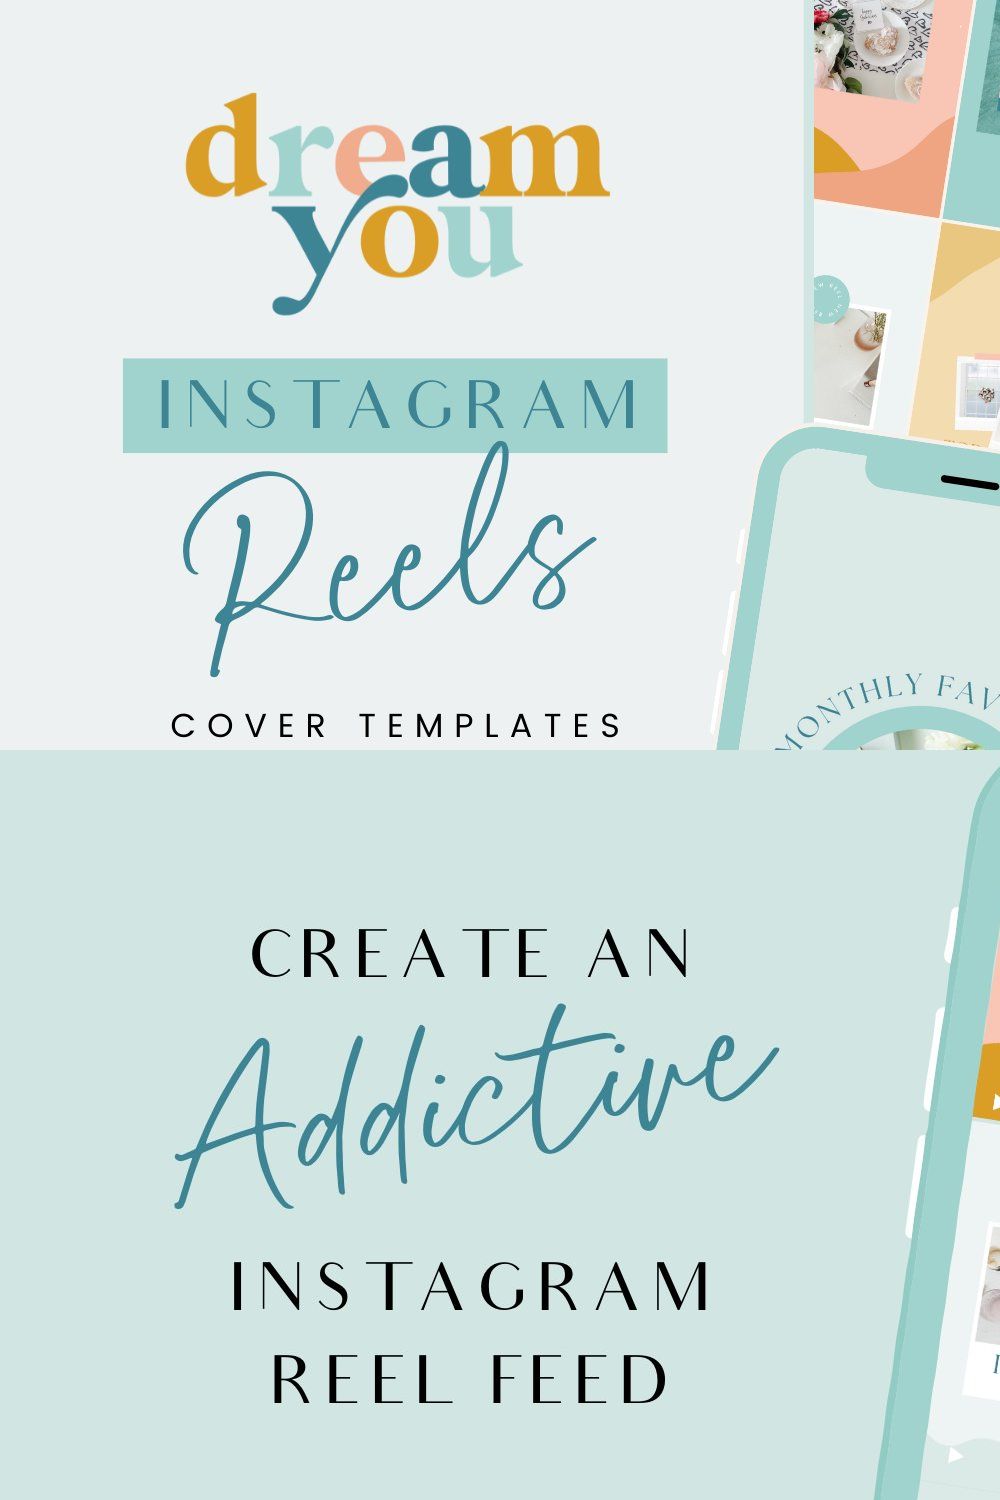 Instagram Reels - Dream You pinterest preview image.